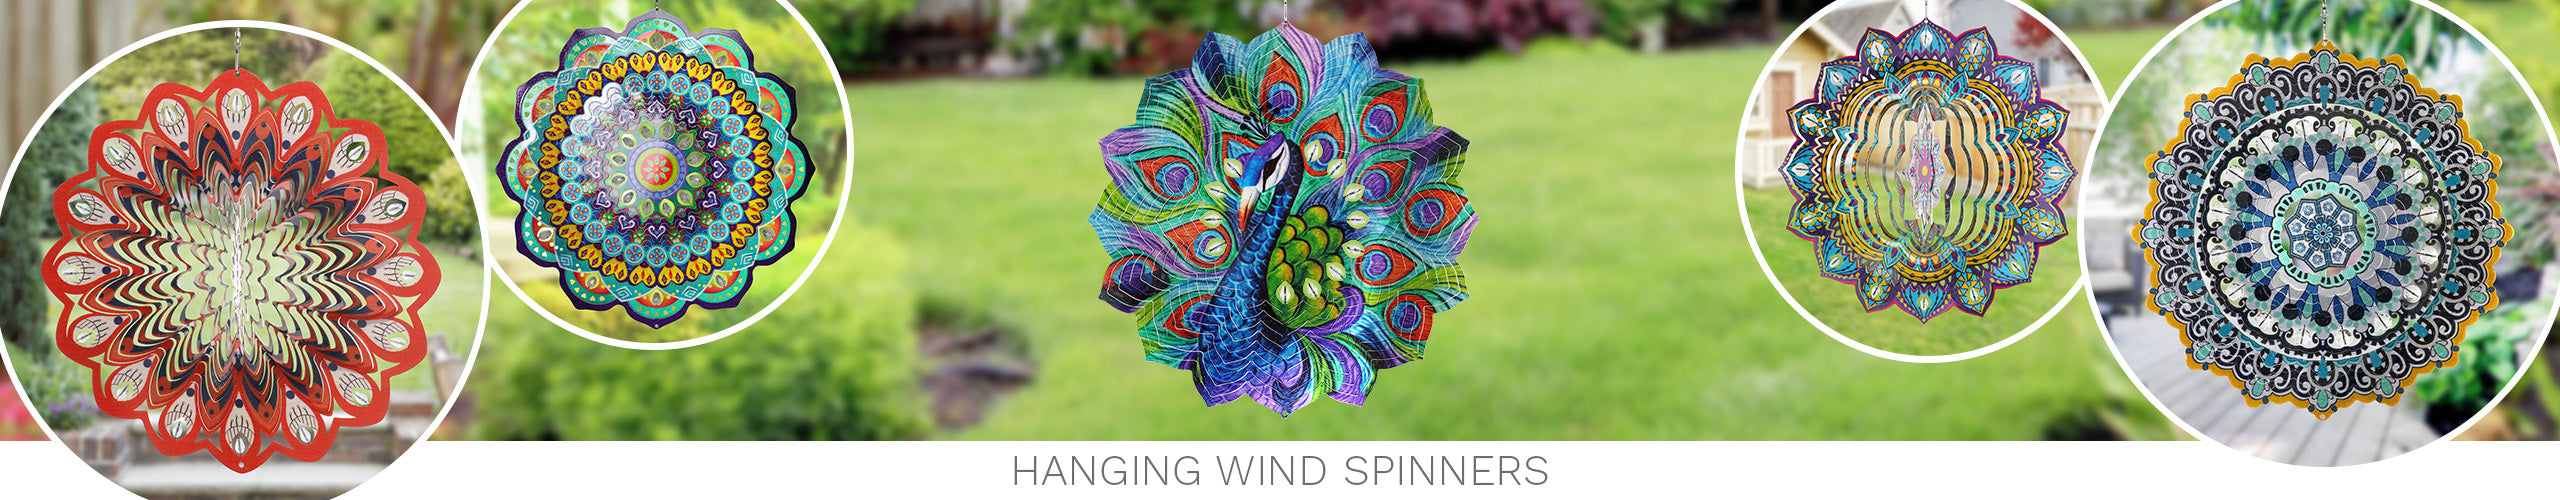 Hanging Wind Spinners